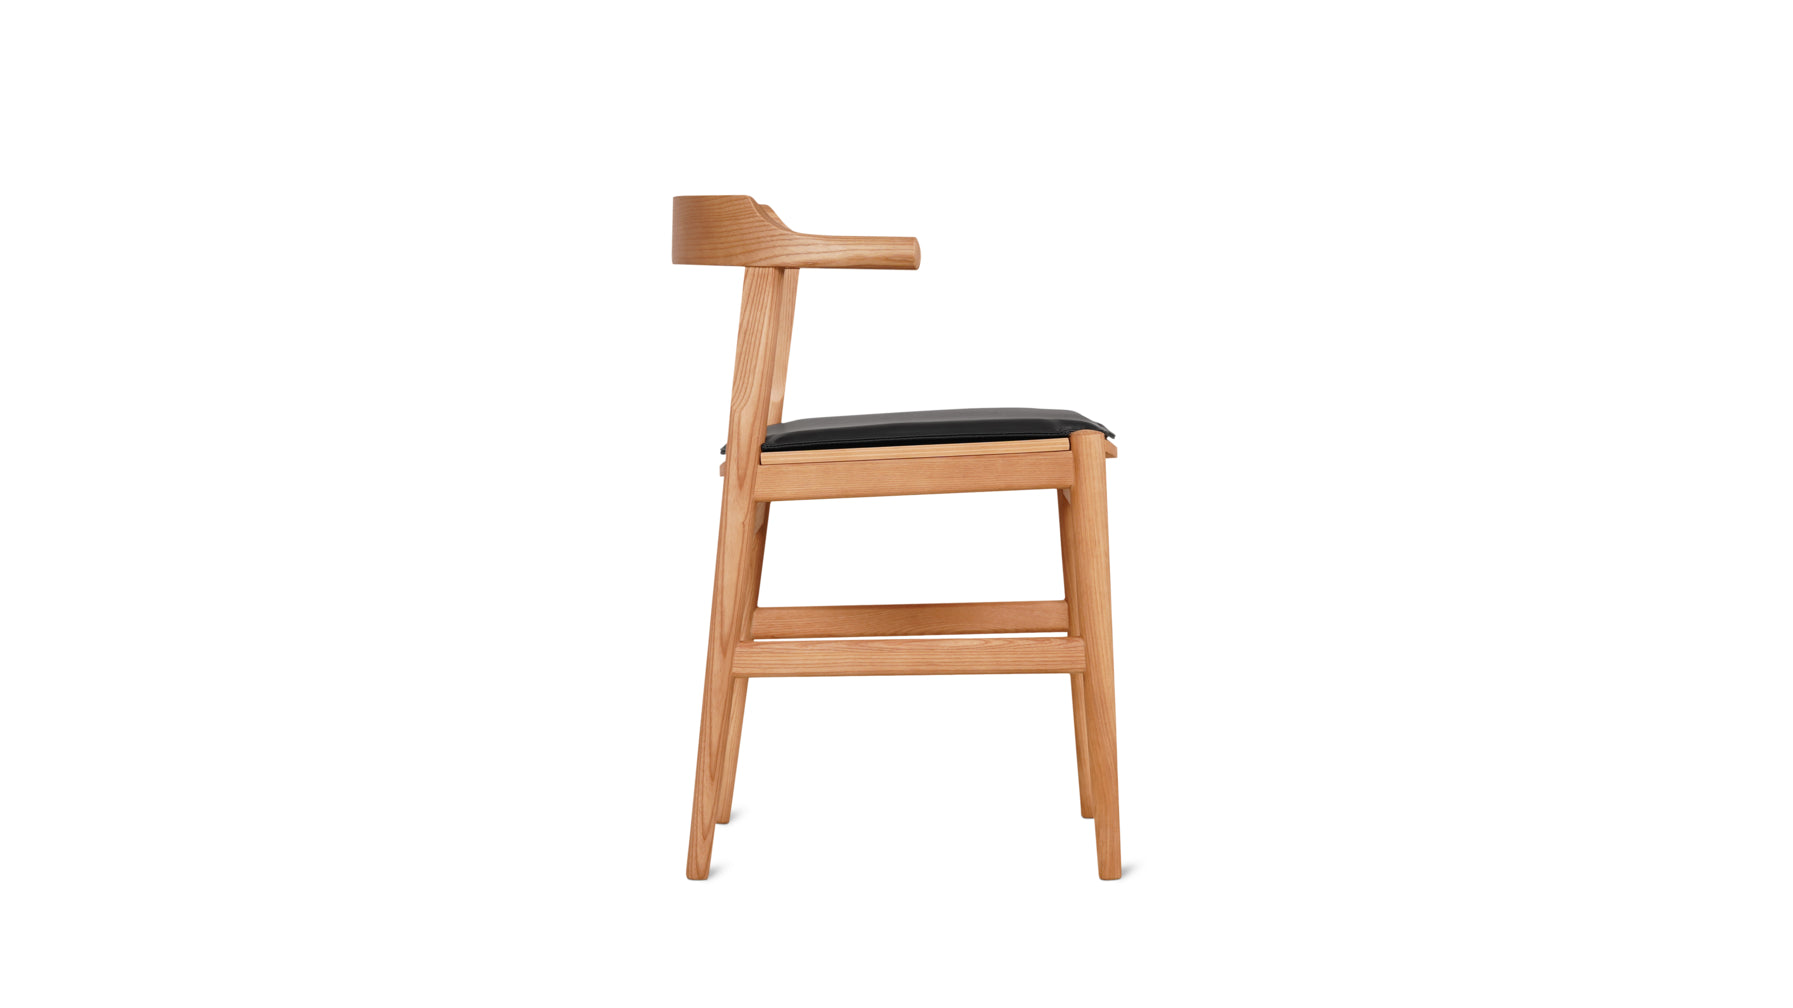 Tuck In Dining Chair with Cushion, White Oak, Wood Seat with Black Cushion - Image 4